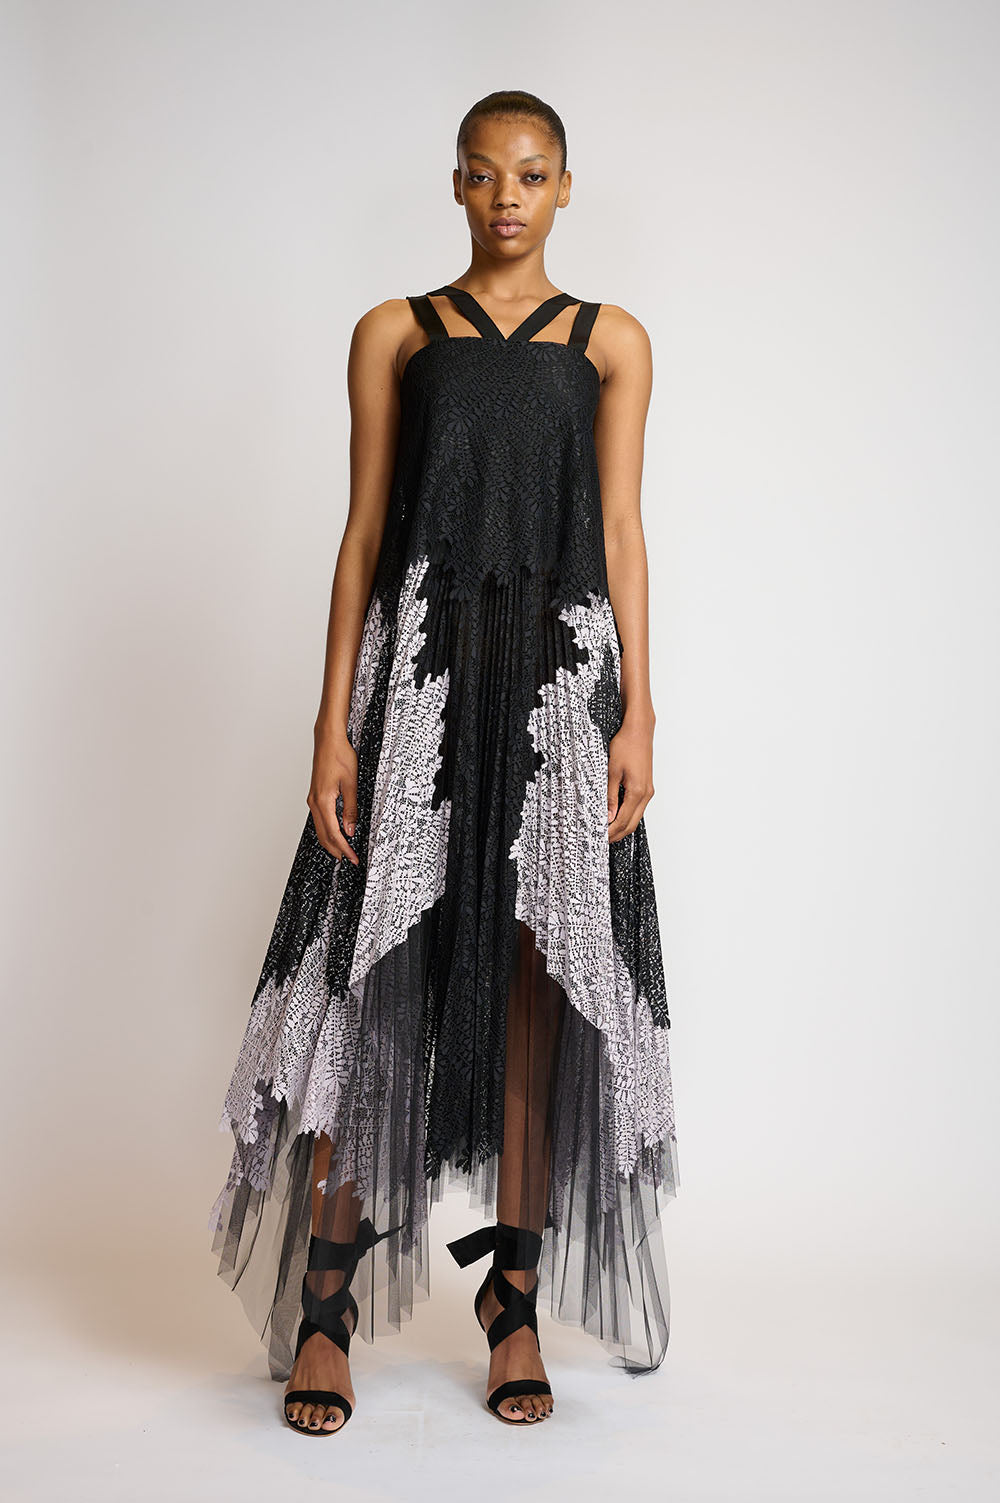 Onyx and Lilac Locust Leaf Applique dress with Asymentrical Pleated hemline 1